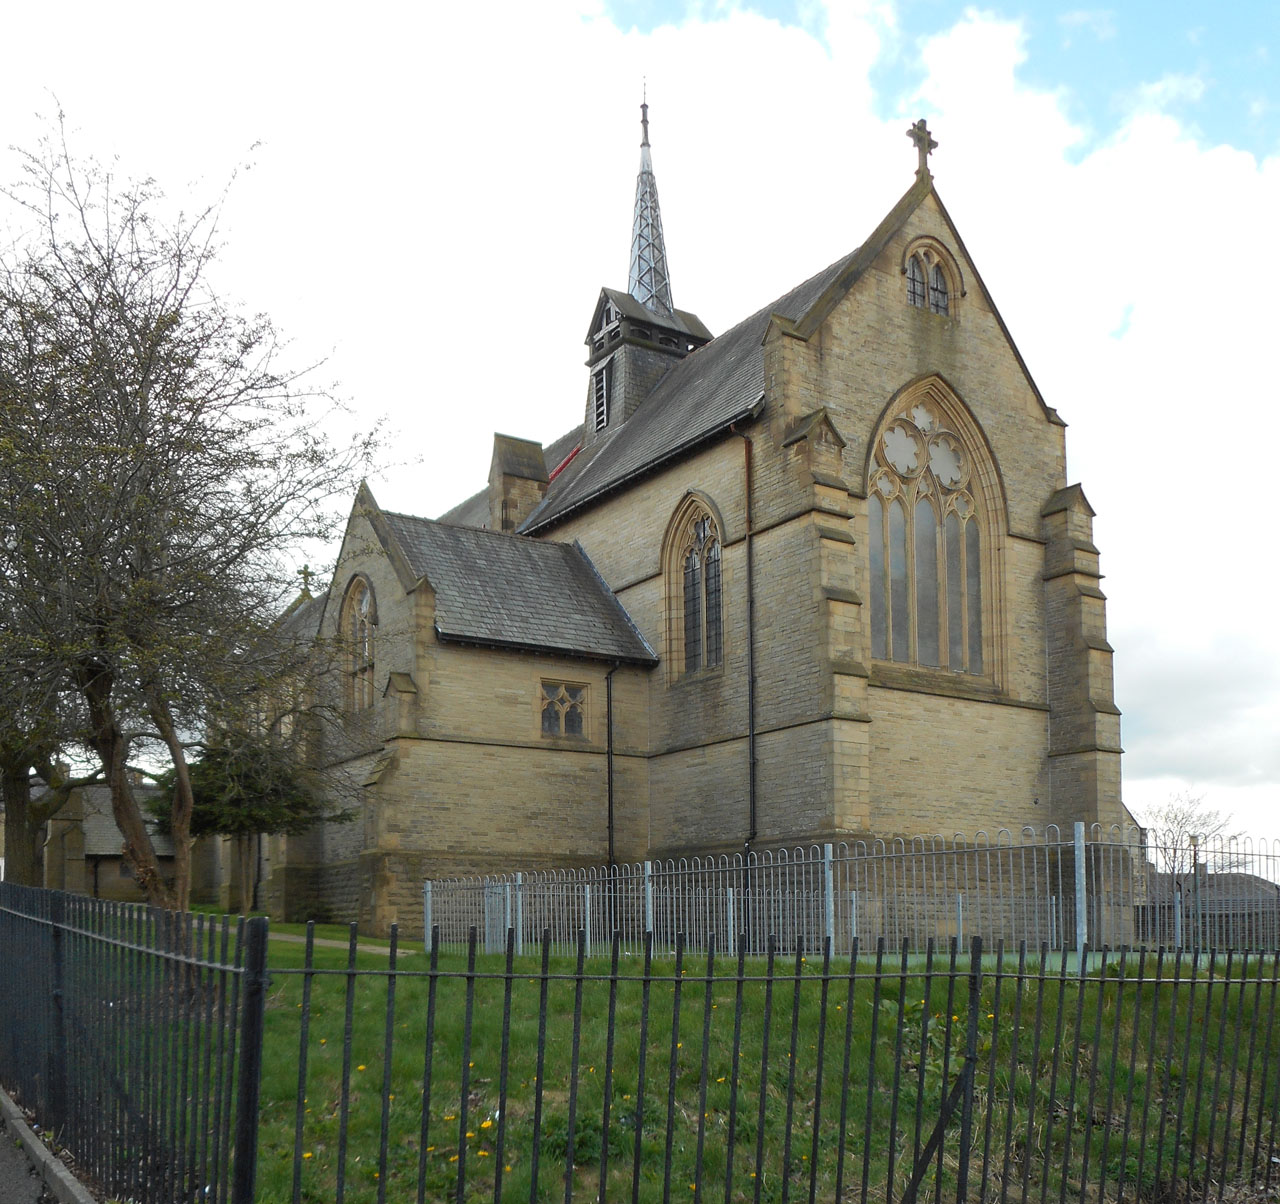 The Church of St Peter, Accrington